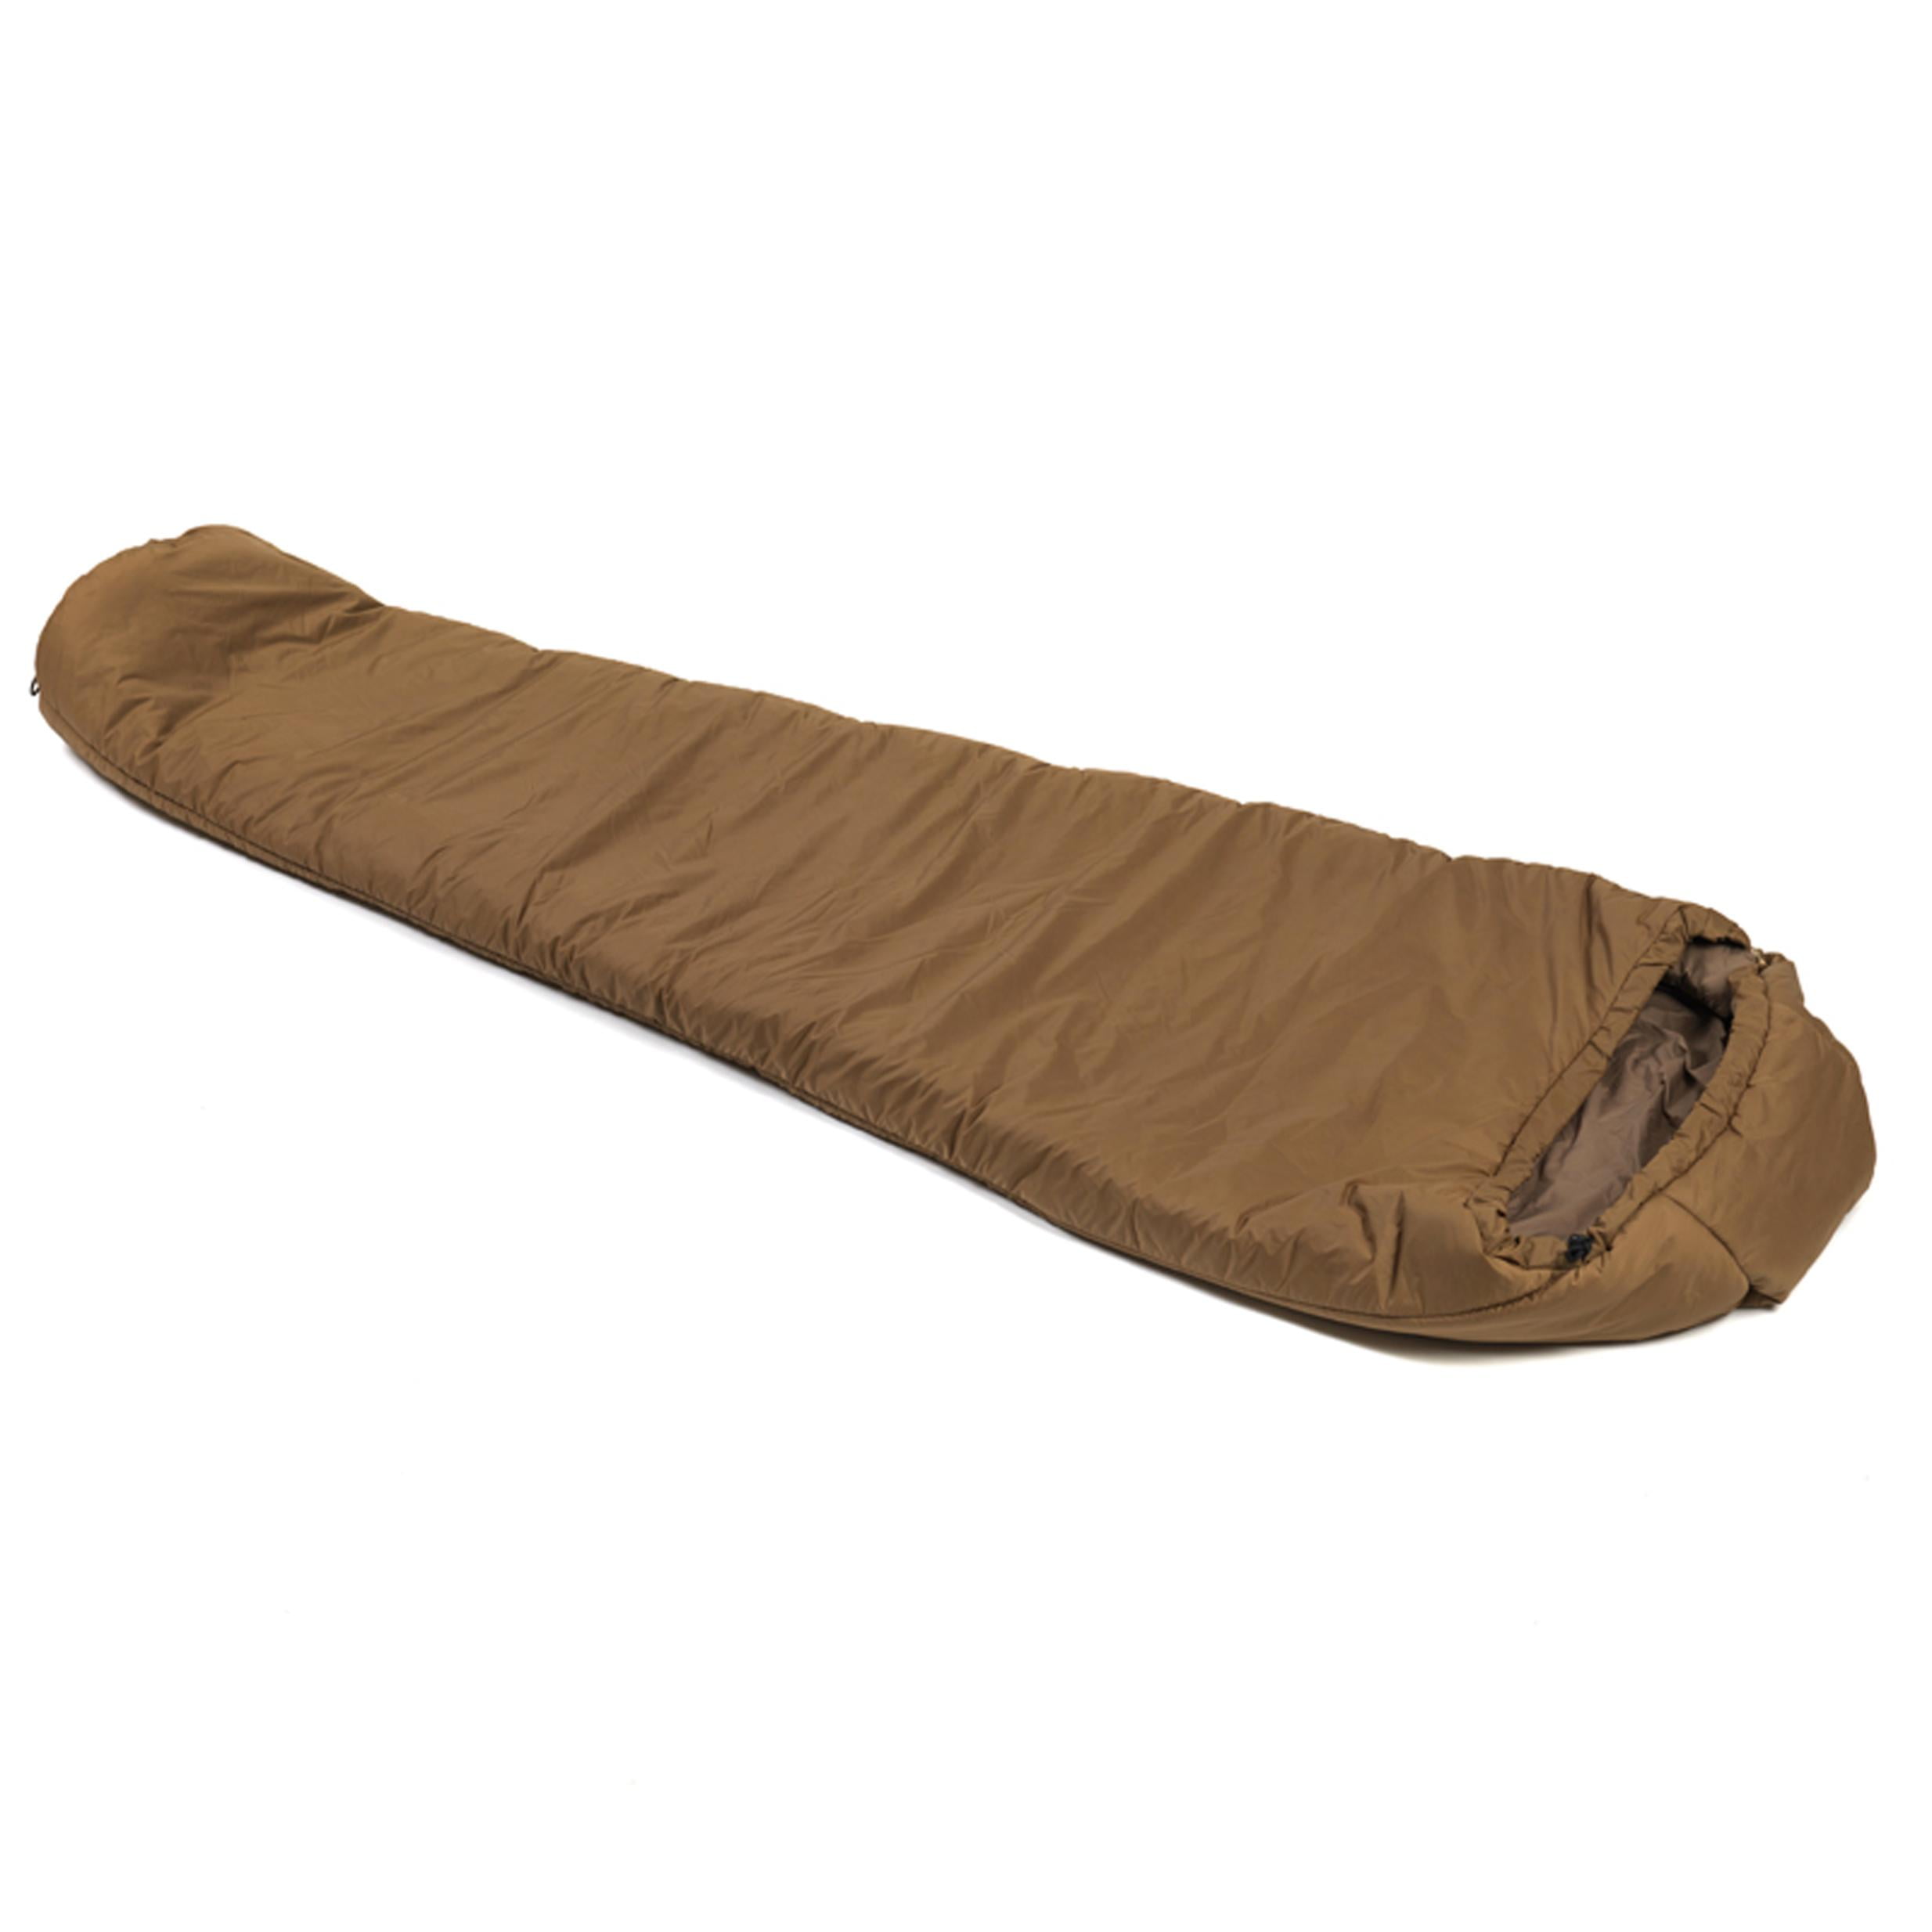 Snugpak Sleeper Lite Basecamp Outdoors -10°c Mummy Style Great For Camping 